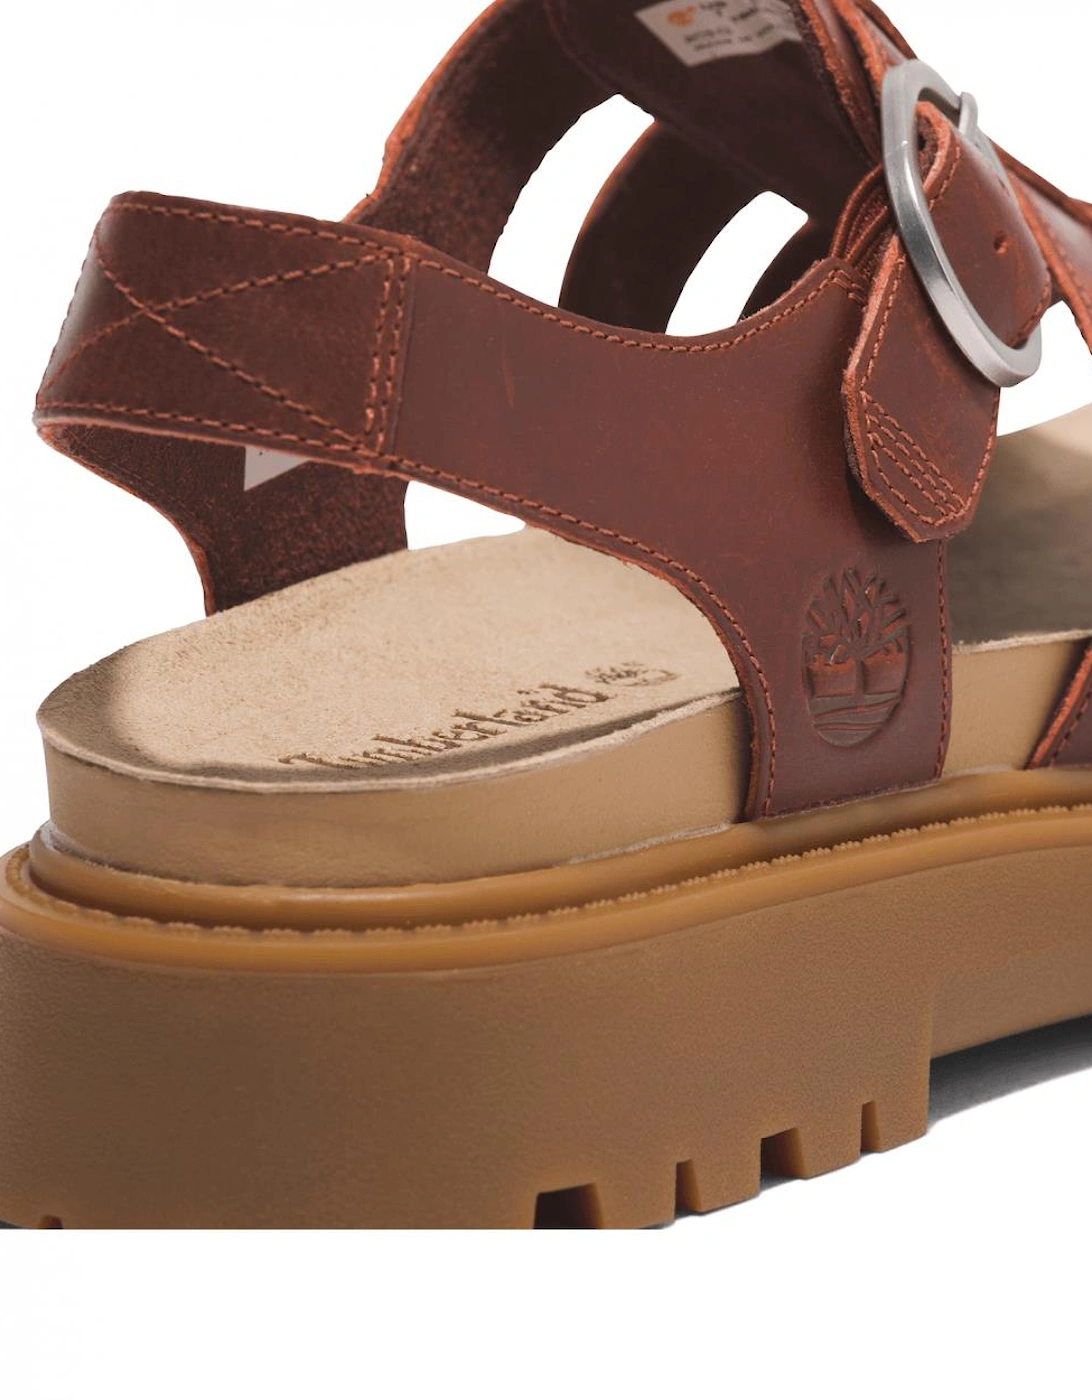 Clairemont Way Womens Fisherman Sandals